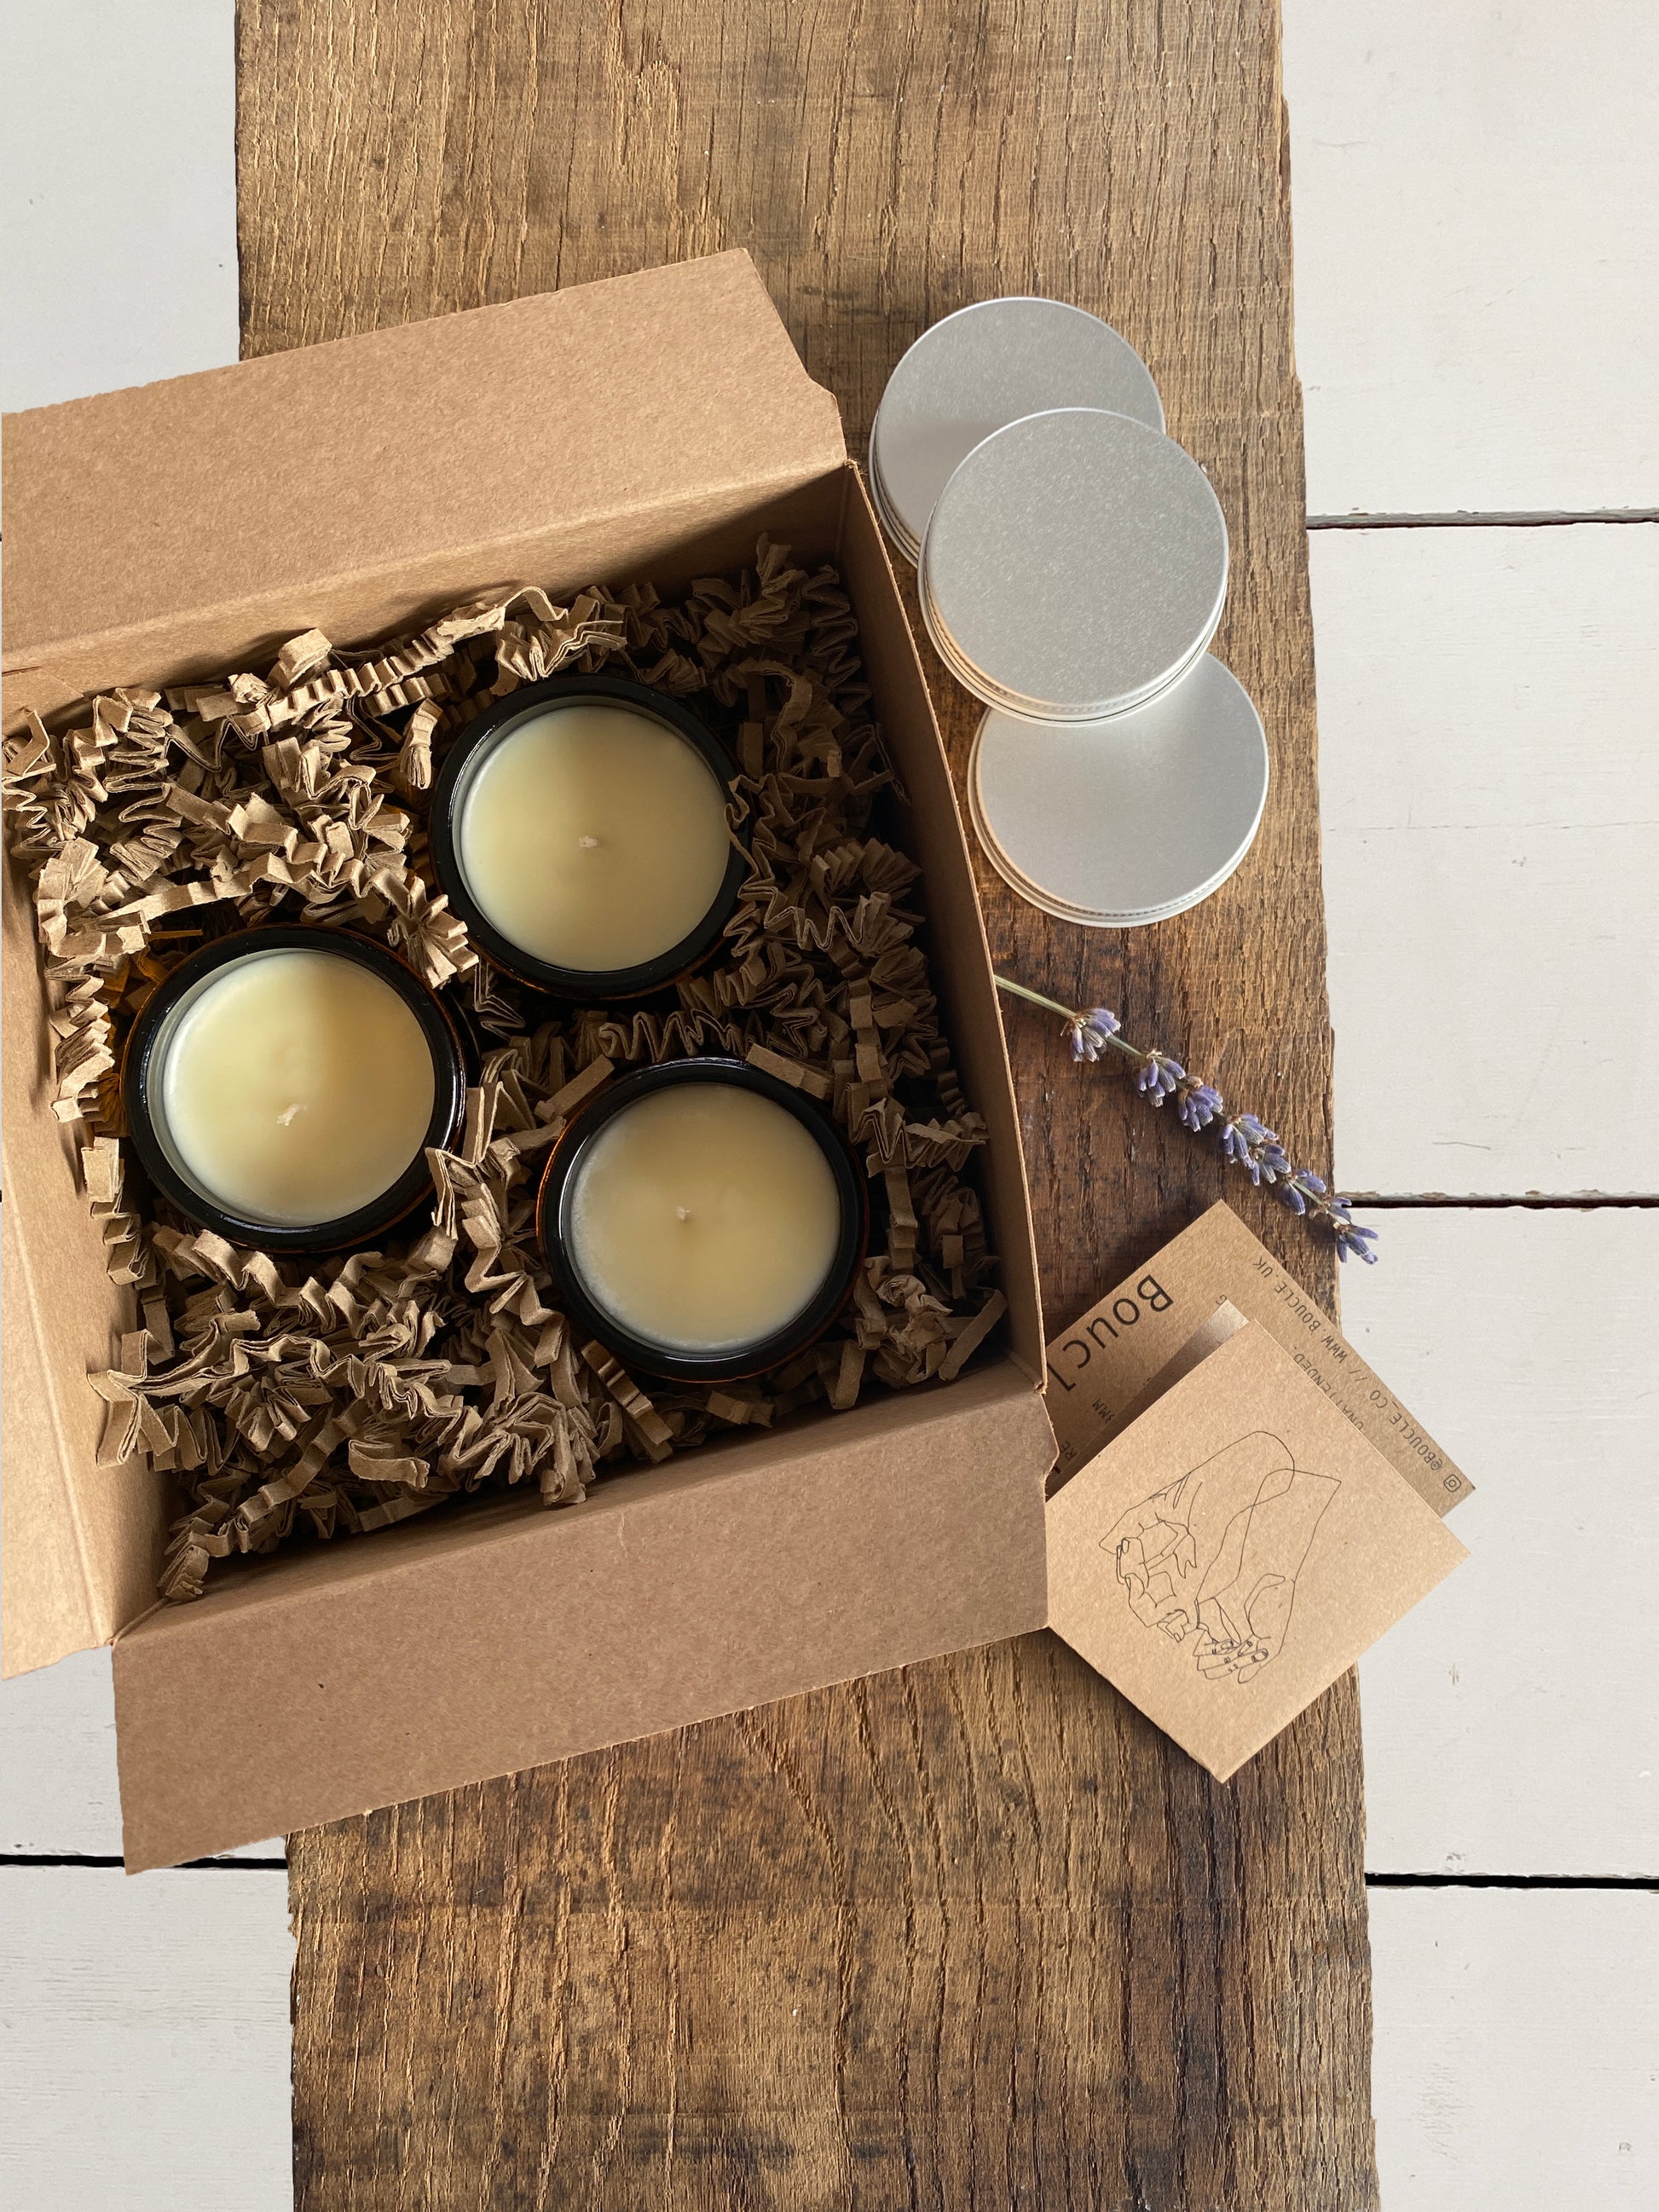 Mini London soy candle trio gift set in their gift box with plastic free packaging. 